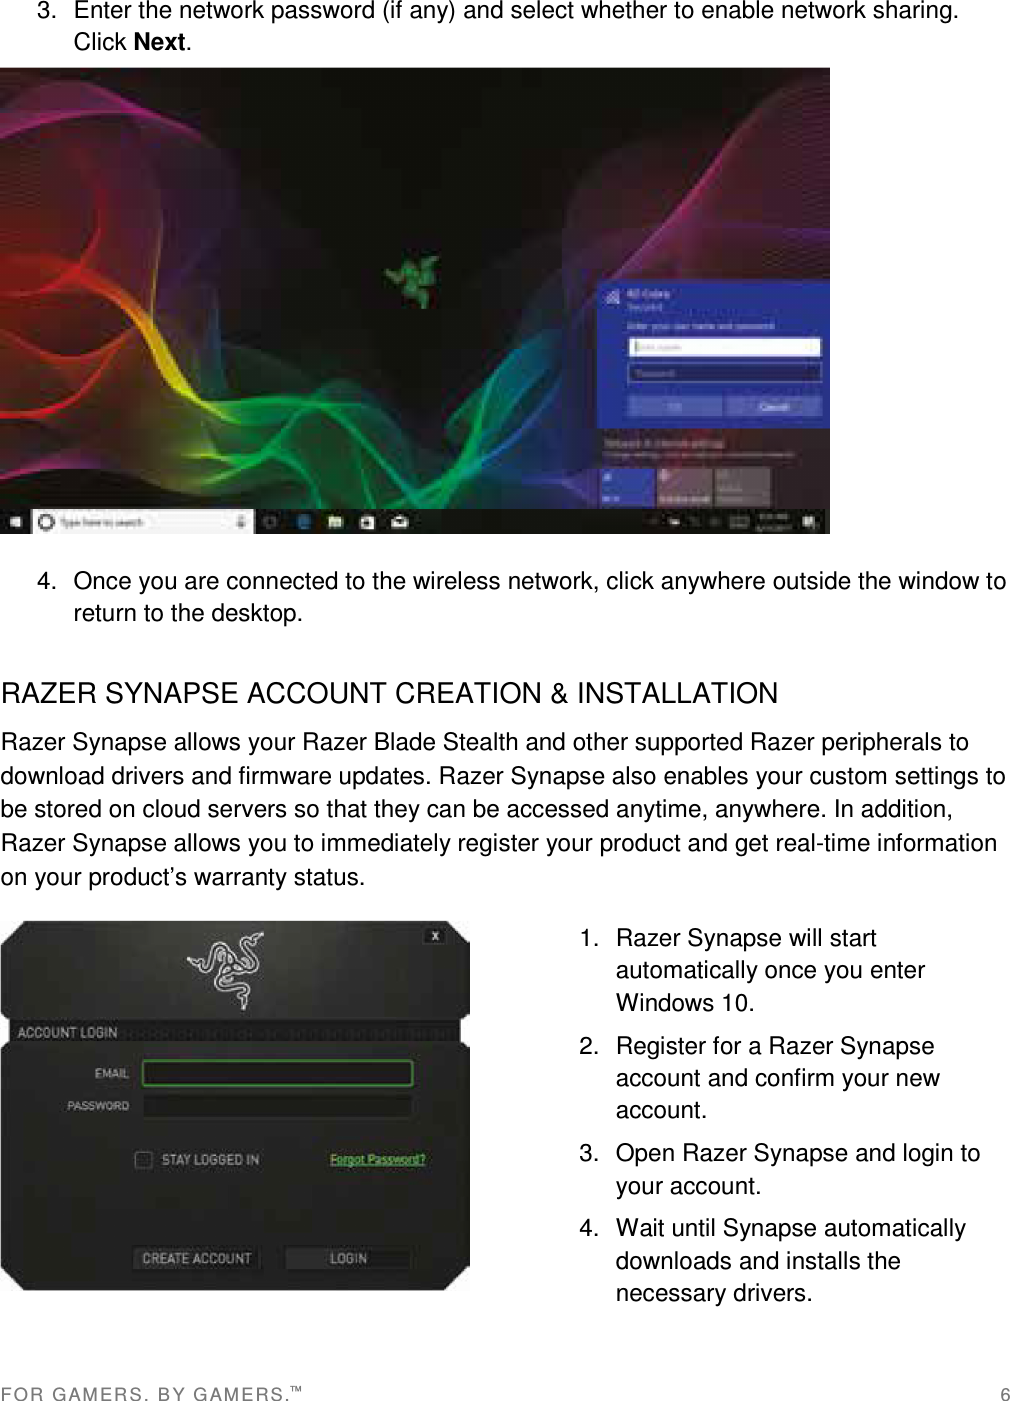 FOR   G AM ER S .   B Y G AM ER S.™   6 3.  Enter the network password (if any) and select whether to enable network sharing. Click Next.  4.  Once you are connected to the wireless network, click anywhere outside the window to return to the desktop. RAZER SYNAPSE ACCOUNT CREATION &amp; INSTALLATION Razer Synapse allows your Razer Blade Stealth and other supported Razer peripherals to download drivers and firmware updates. Razer Synapse also enables your custom settings to be stored on cloud servers so that they can be accessed anytime, anywhere. In addition, Razer Synapse allows you to immediately register your product and get real-time information on your product’s warranty status.  1.  Razer Synapse will start automatically once you enter Windows 10. 2.  Register for a Razer Synapse account and confirm your new account. 3.  Open Razer Synapse and login to your account. 4.  Wait until Synapse automatically downloads and installs the necessary drivers.   